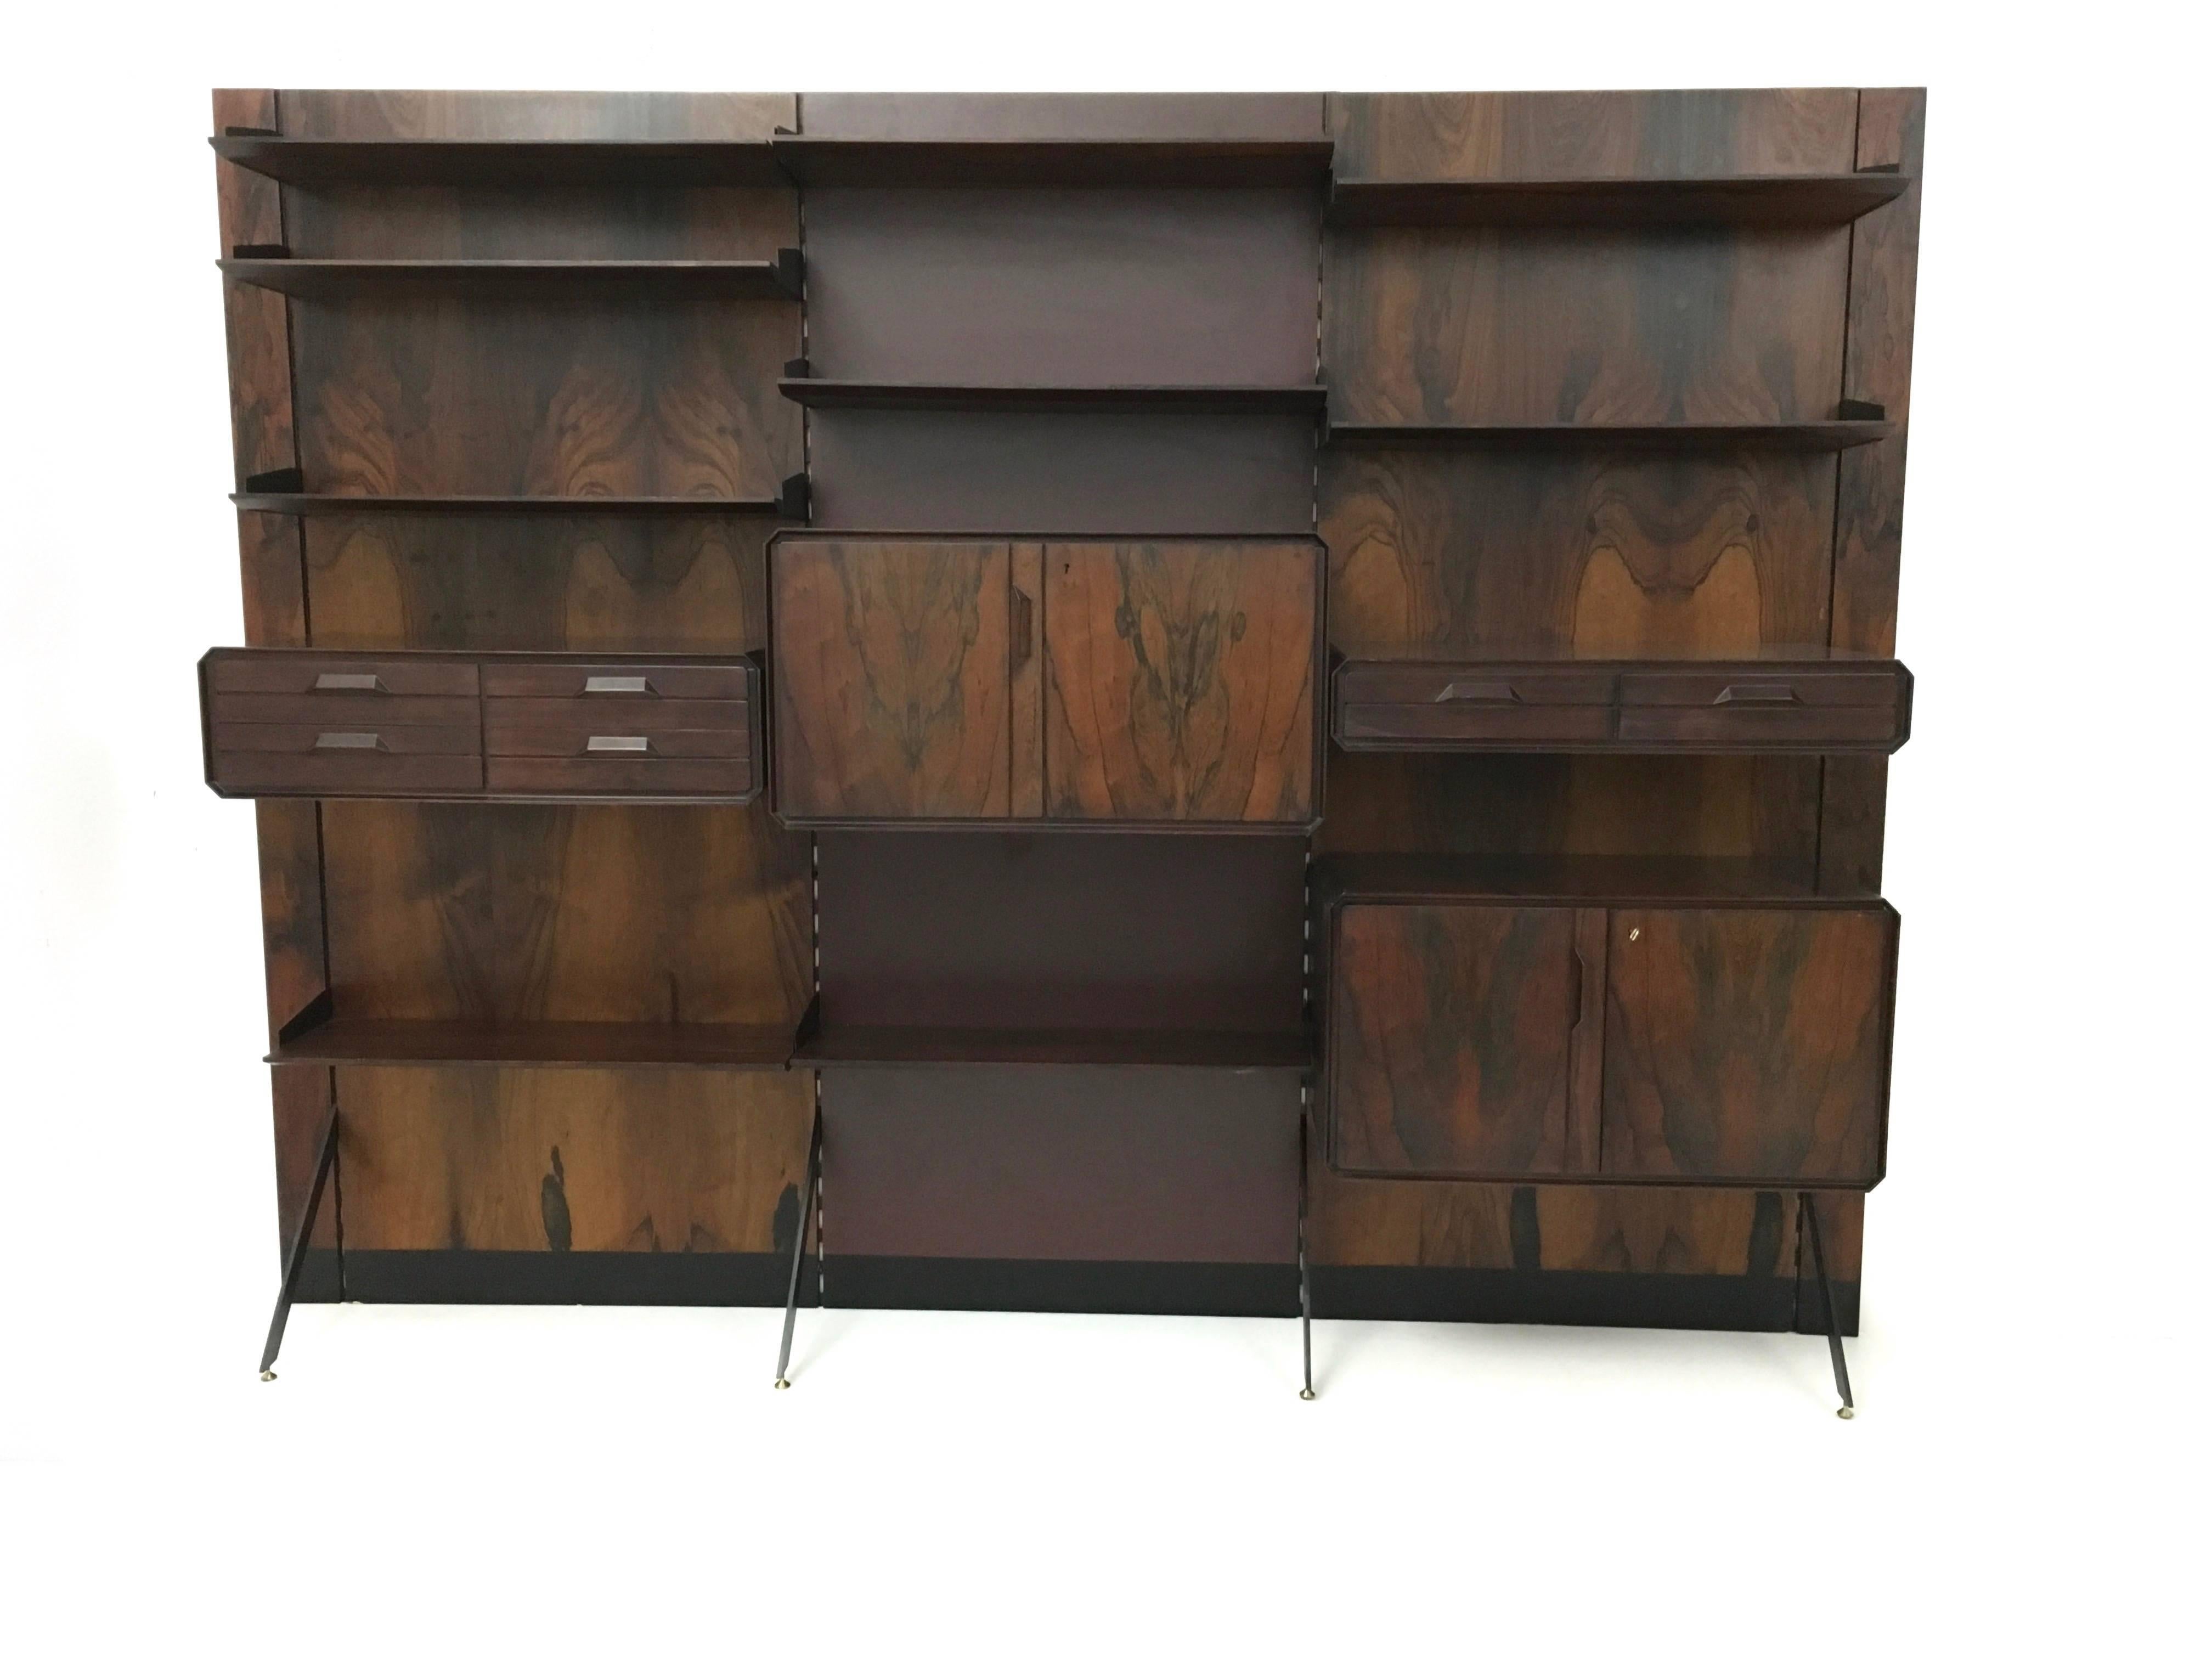 This 1960s bookcase is made from wood, formica, varnished metal and features brass parts. 
This fantastic piece is in excellent original condition with its original patina and it is ready to become a piece in the home. 

Measures: Width 276 cm